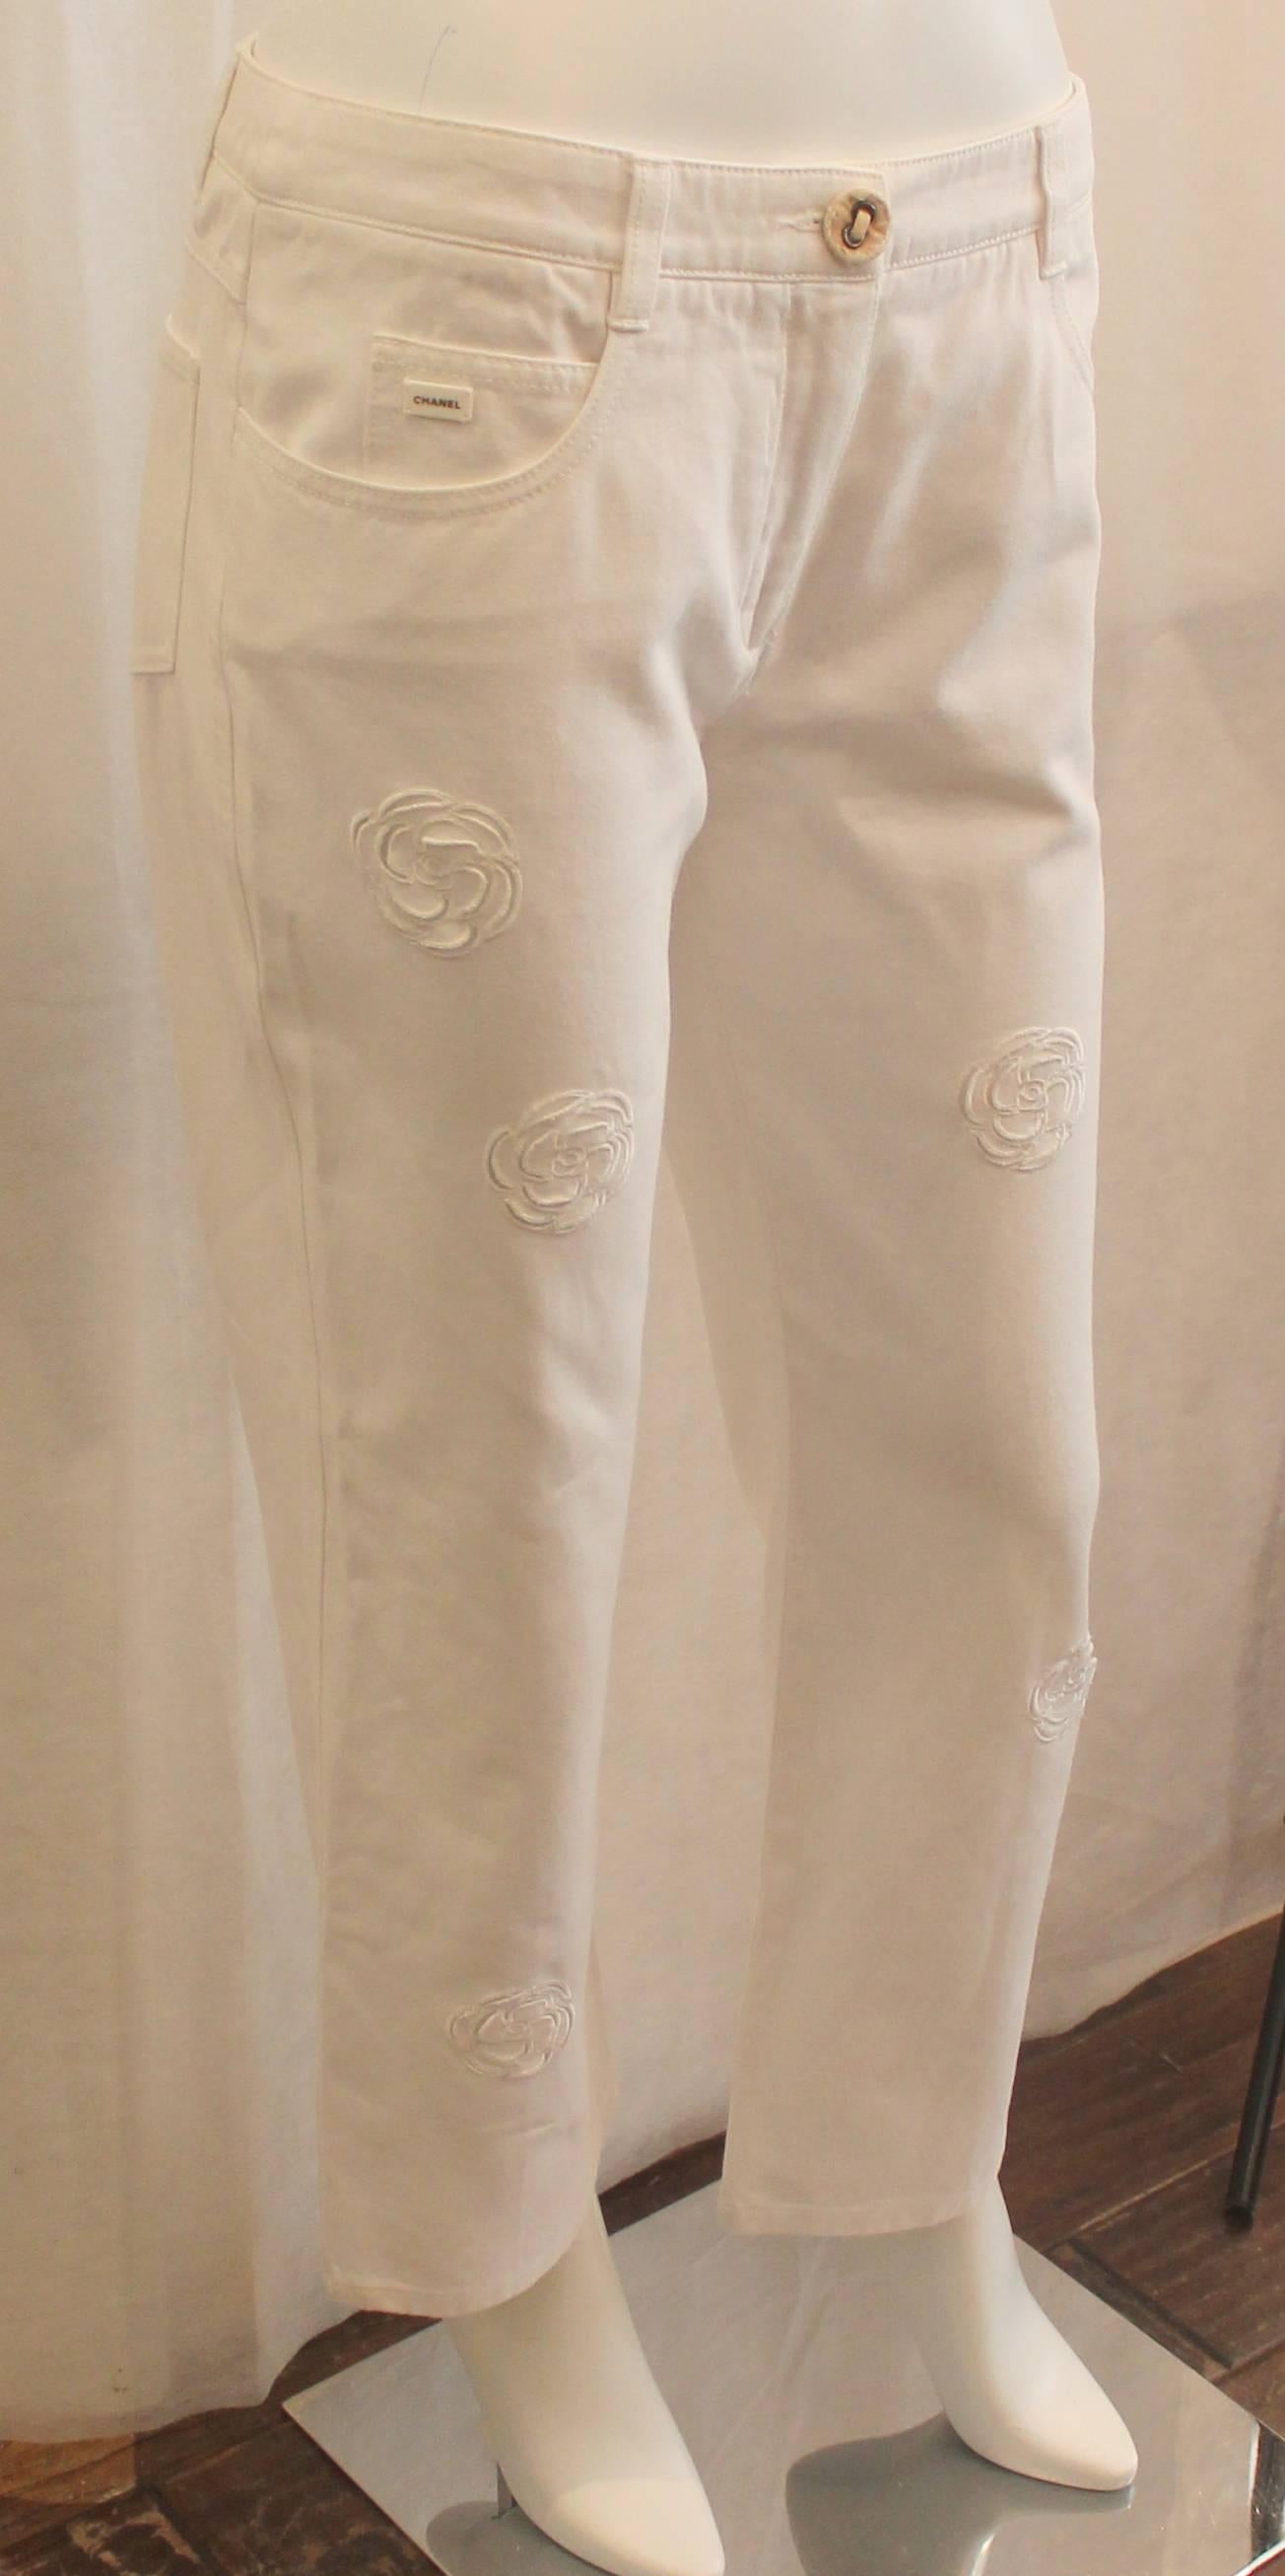 Chanel White Denim Boot Cut Jeans with Camellia Cutouts - 40. These jeans are in good condition with general wear to the fabric. The pants have a beige colored denim button and an enamel mini Chanel plaque on them.

Measurements:
Waist-